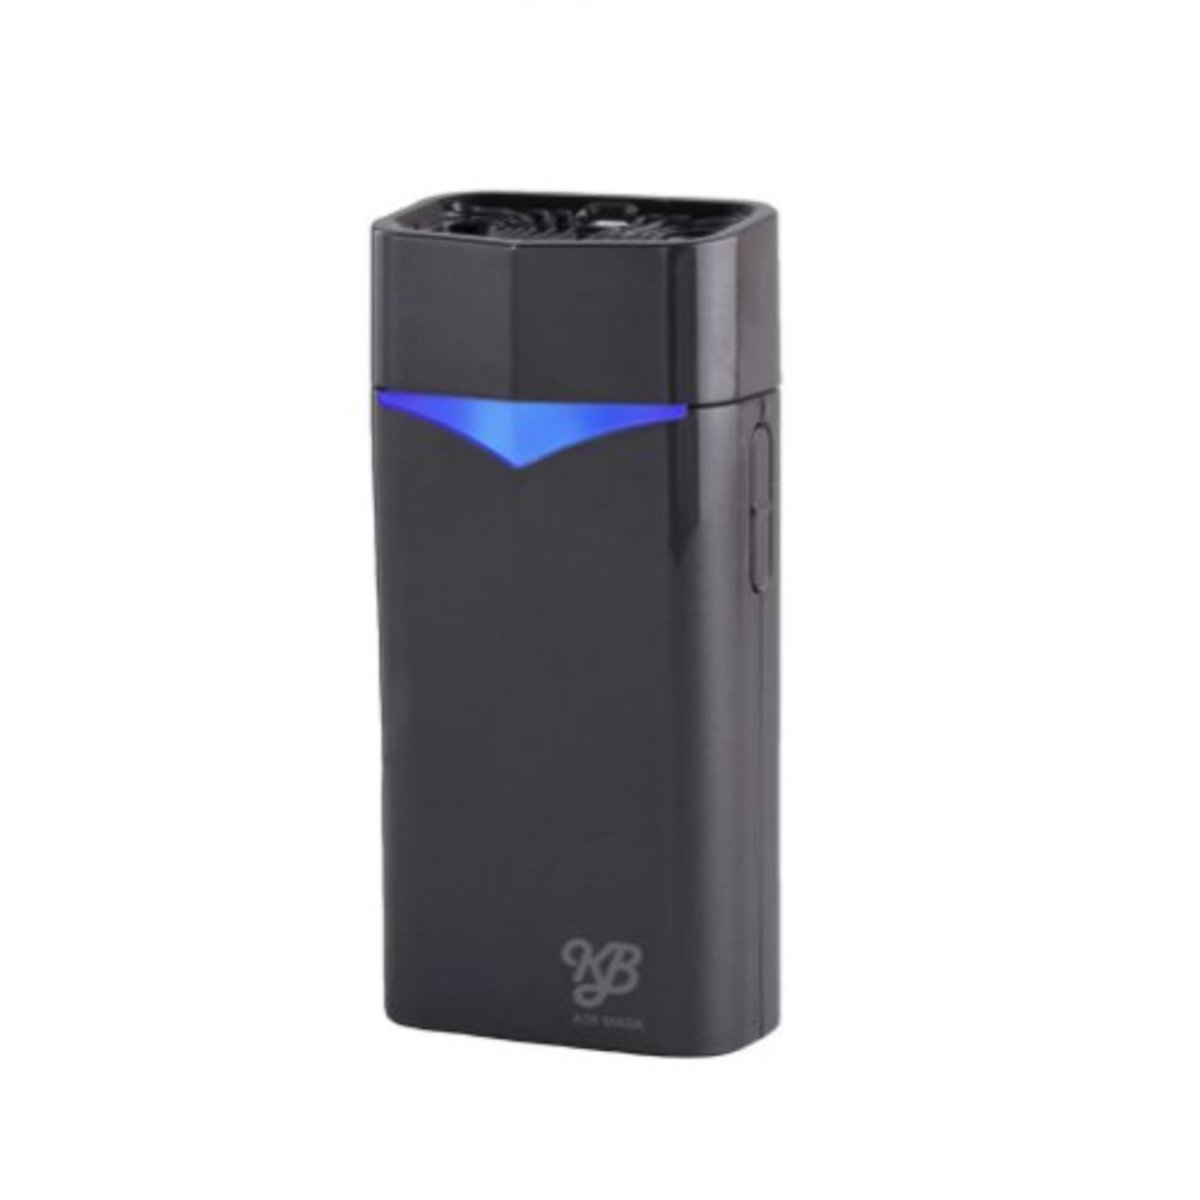 KB - Air Mask Dual Discharge Ion Portable Air Purifier - Black [Made in Japan. Hong Kong licensed goods]